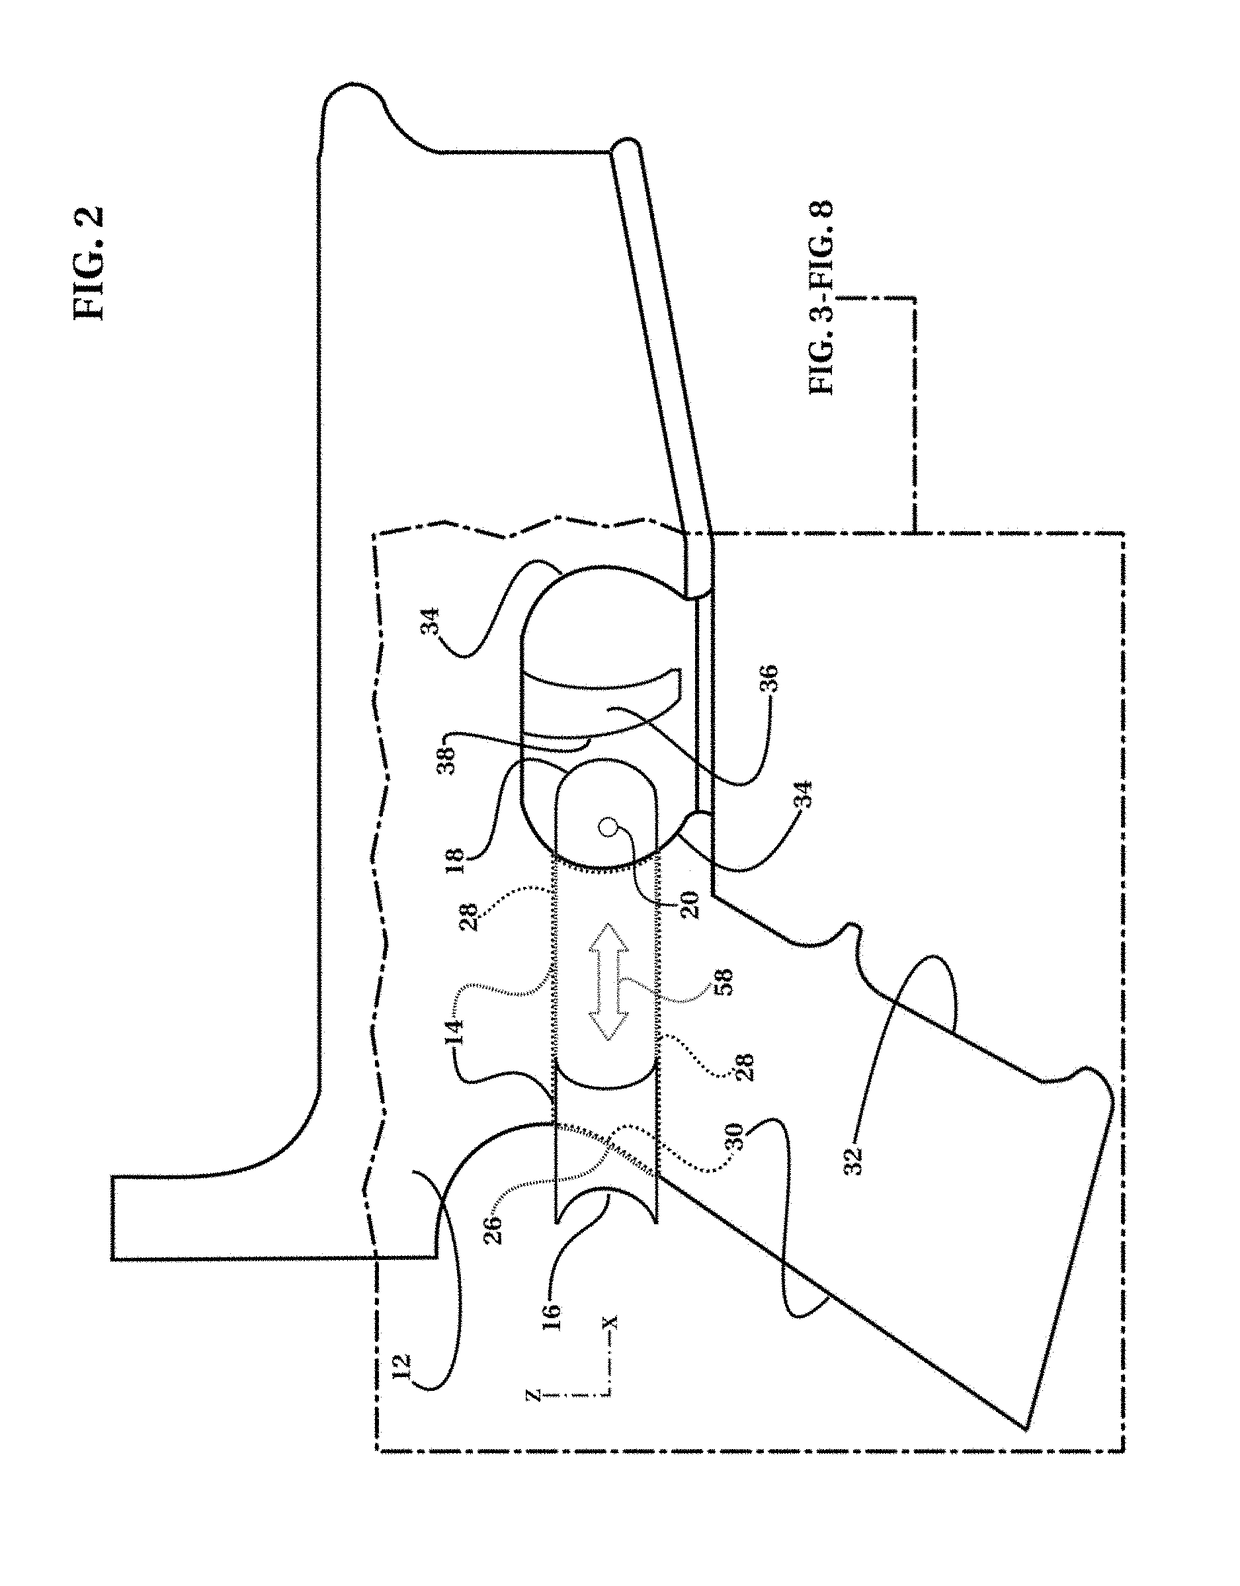 Method and mechanism for interactively governing trigger movement and regulating the cyclic firing rate of firearms